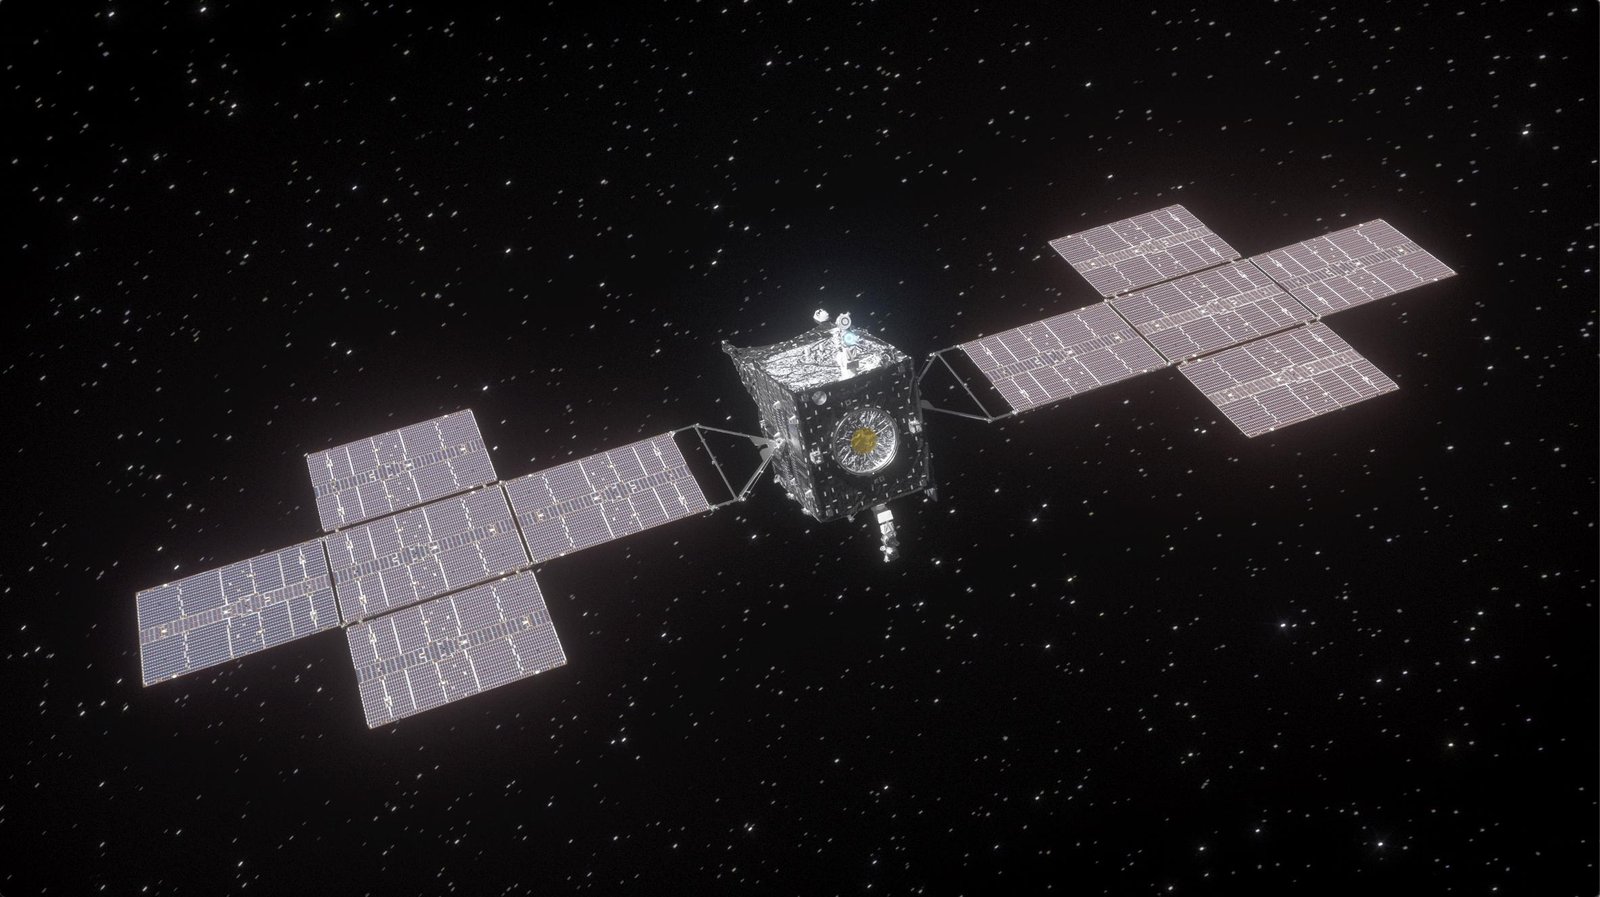 NASA’s Psyche spacecraft just fired a laser 10 million miles away in deep space Space